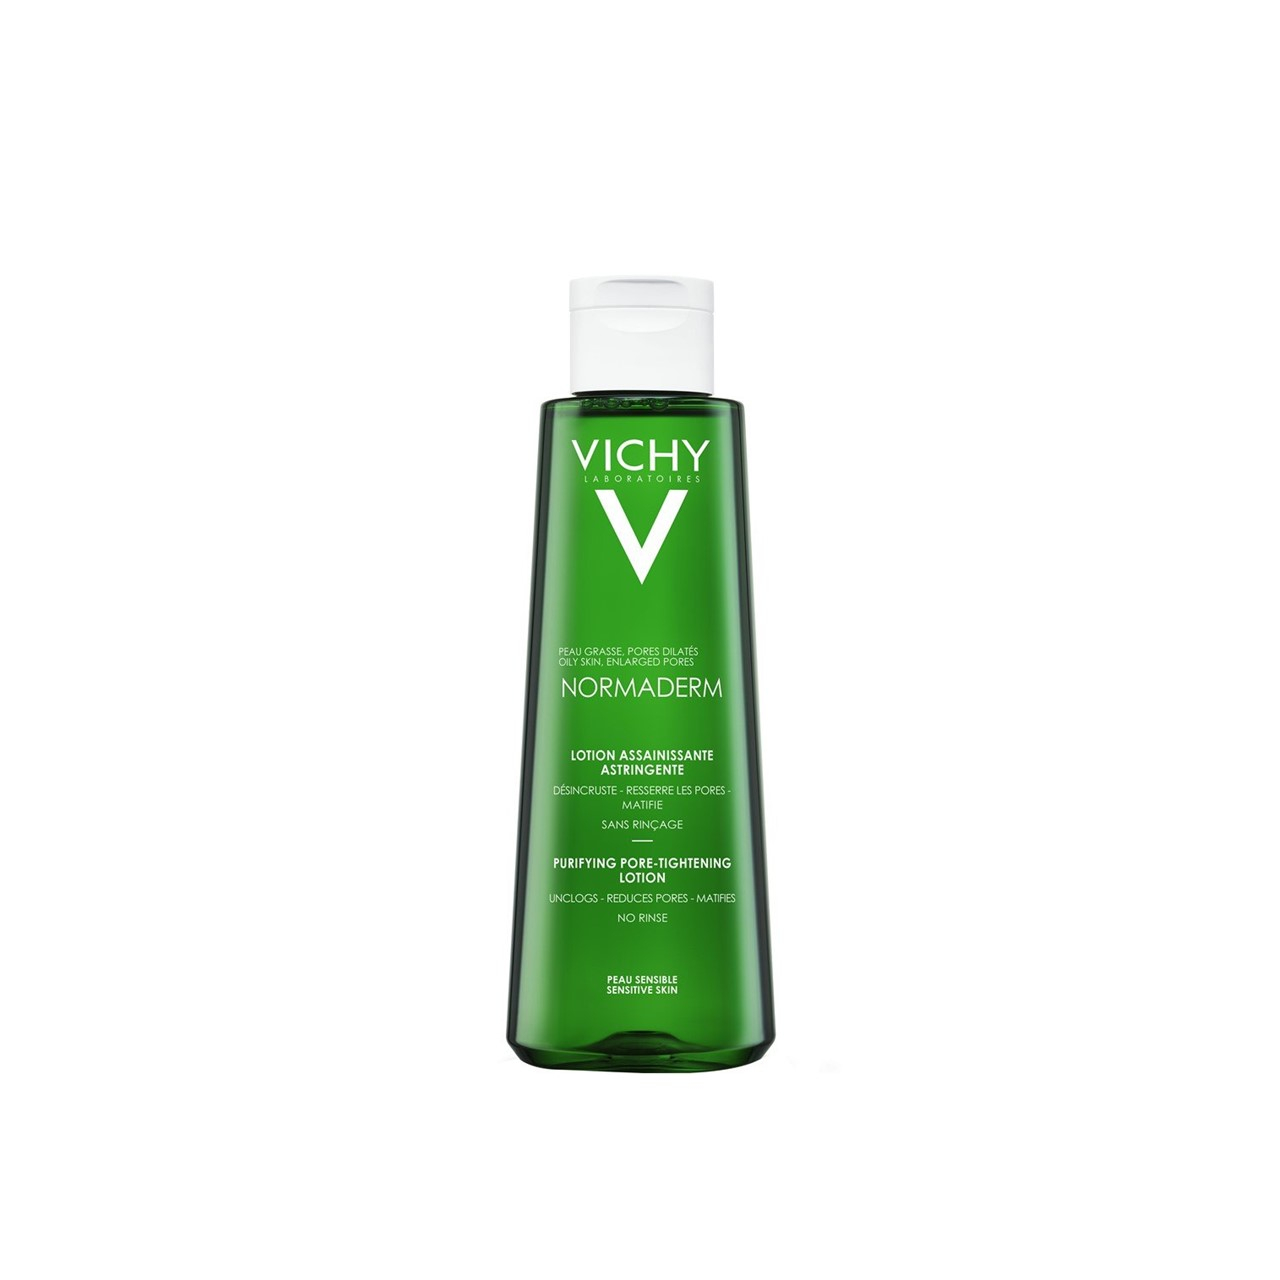 Vichy Normaderm Purifying Pore-Tightening Lotion 200ml (6.76fl oz)